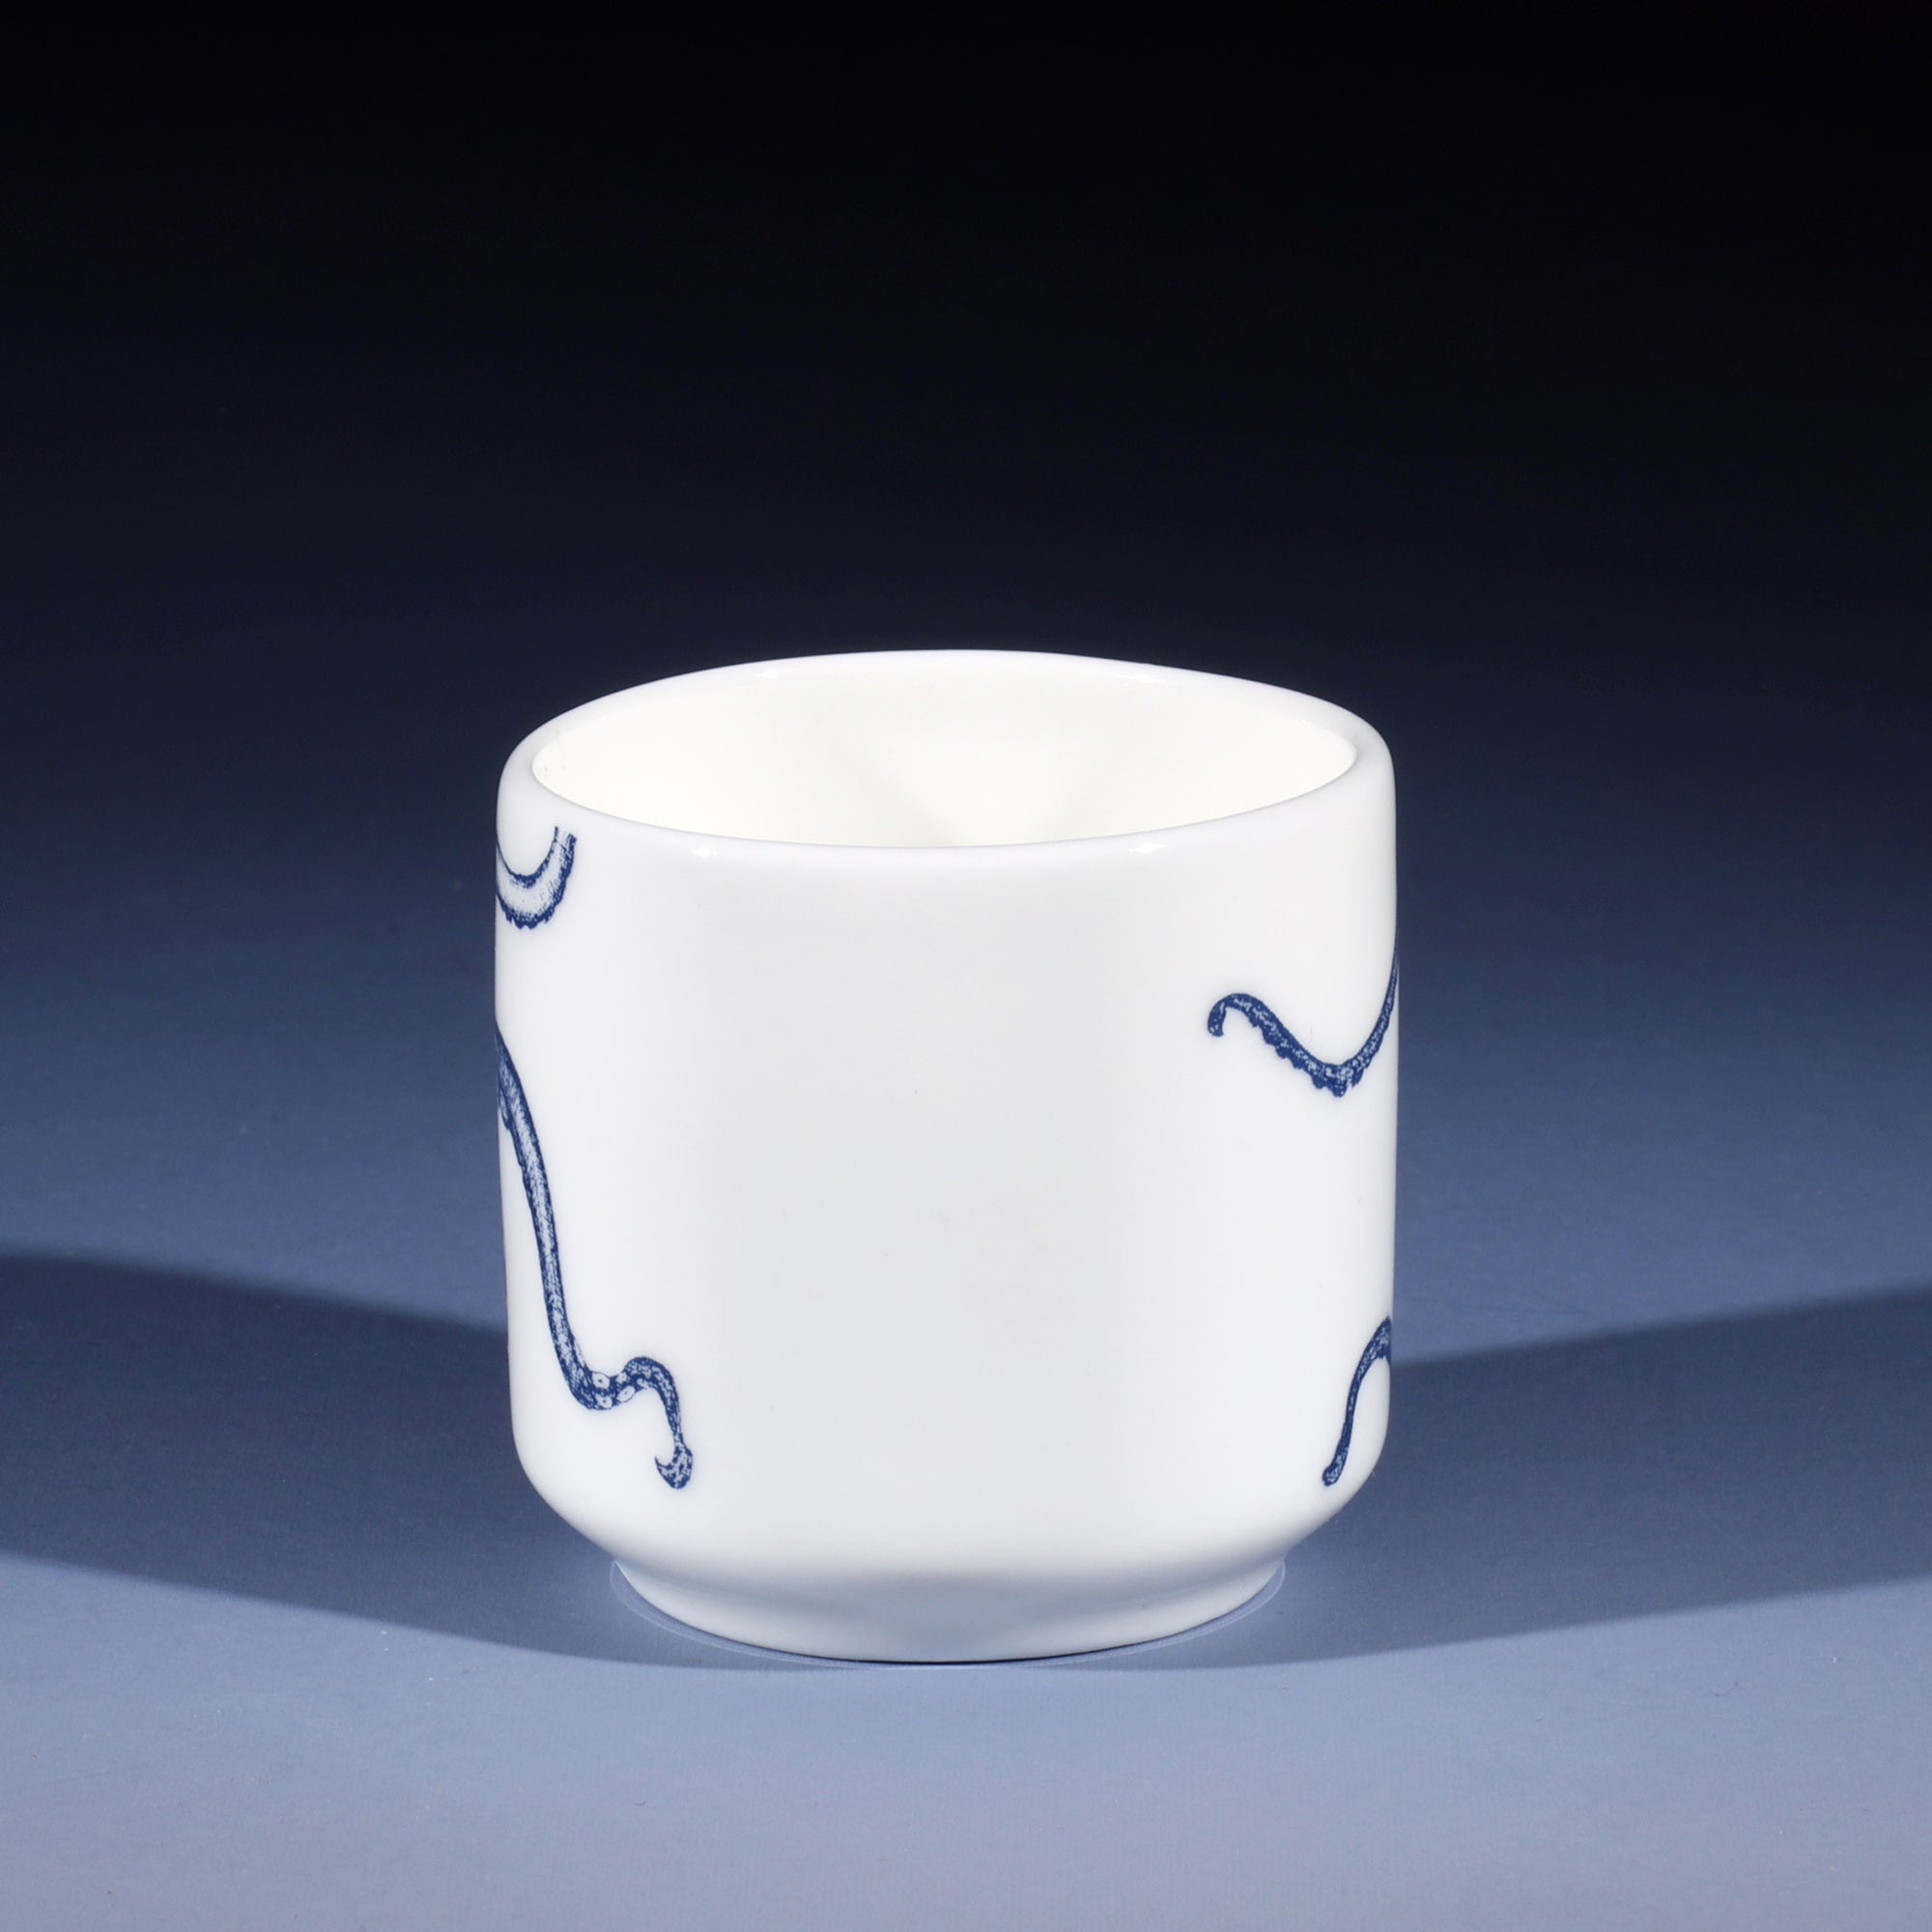 Bone china Egg cup in our classic Blue and White range with an Octopus design, this side showing more of the tentacles